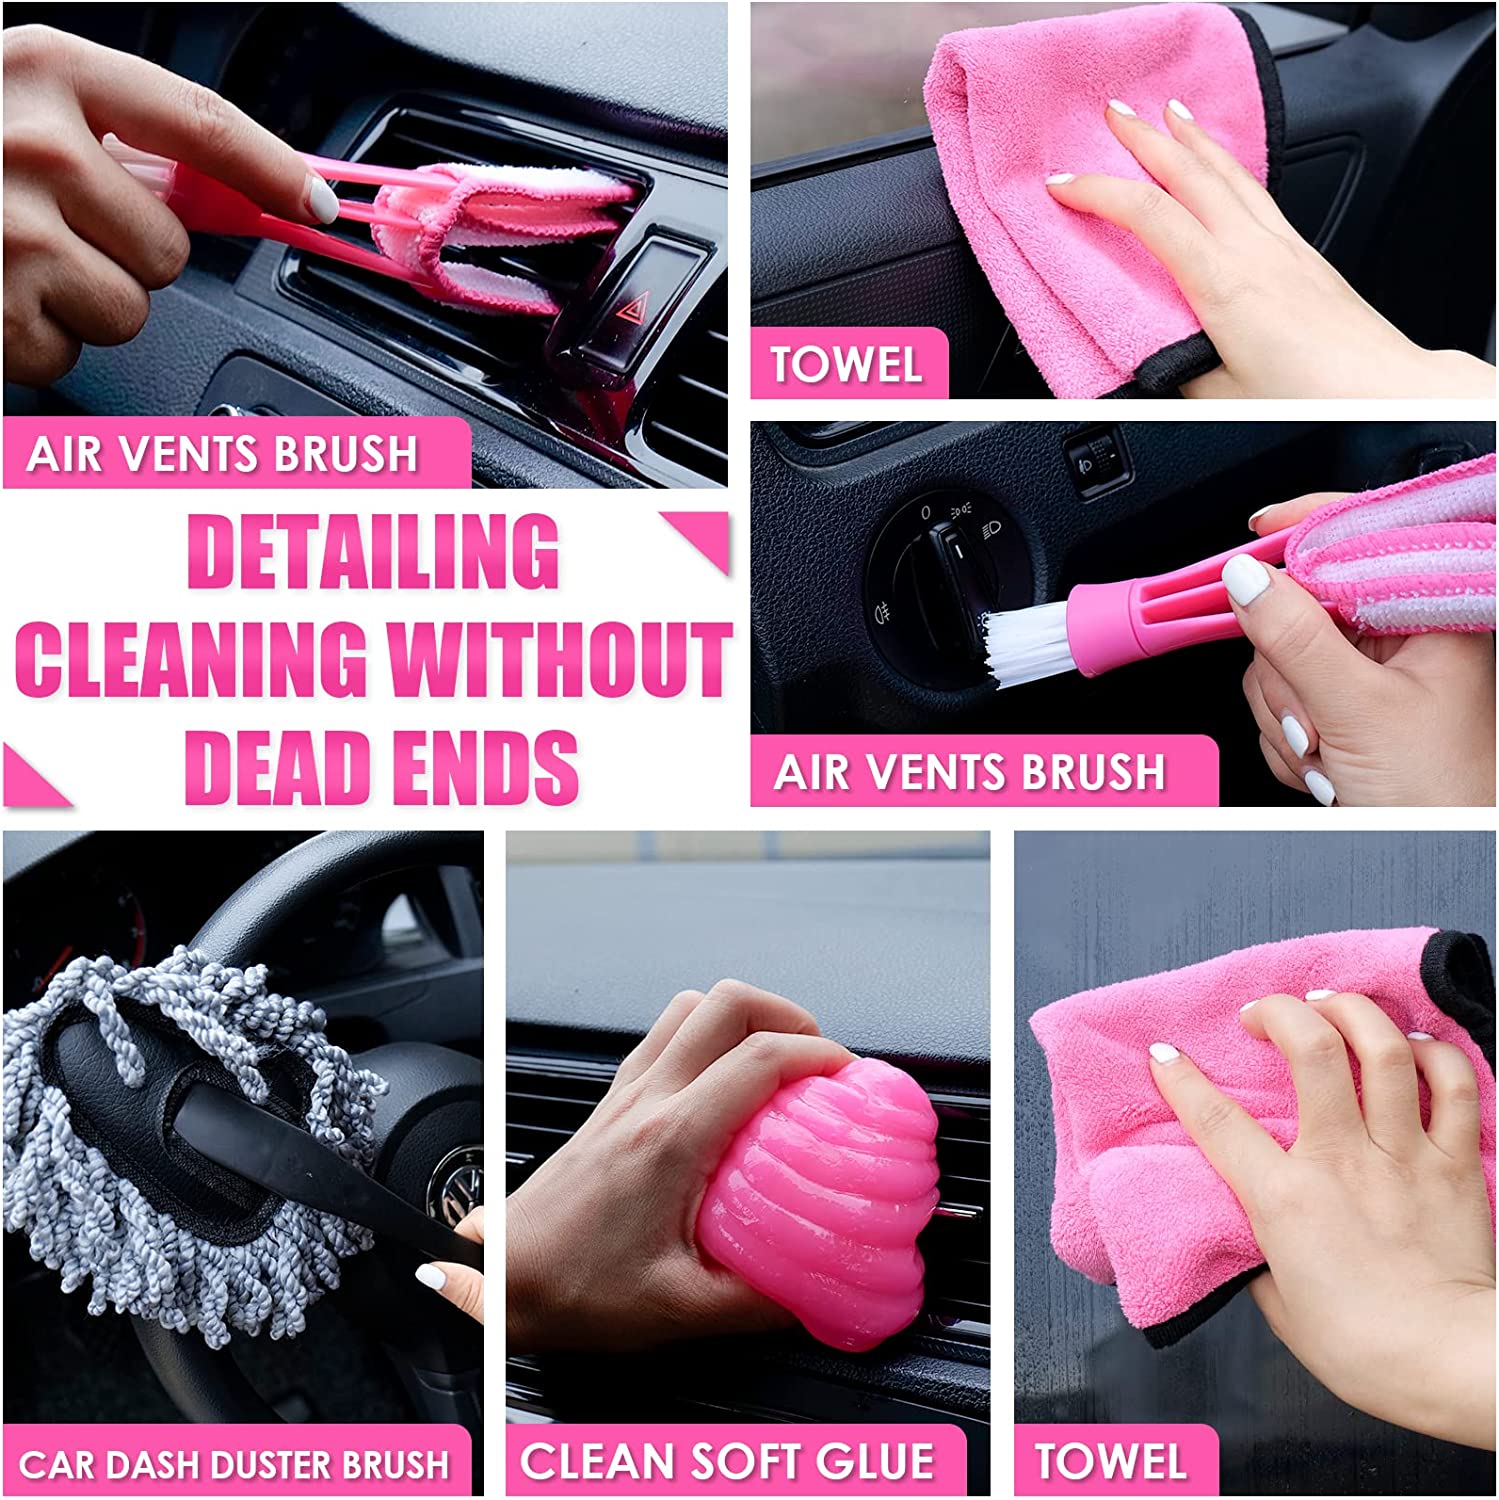 17pcs Car Cleaning Kit, Pink Car Interior Detailing Kit with High Power  Handheld Vacuum, Detailing Brush Set, Windshield Cleaner, Cleaning Gel,  Complete Car Cleaning Supplies for Women - Staging Magnificent